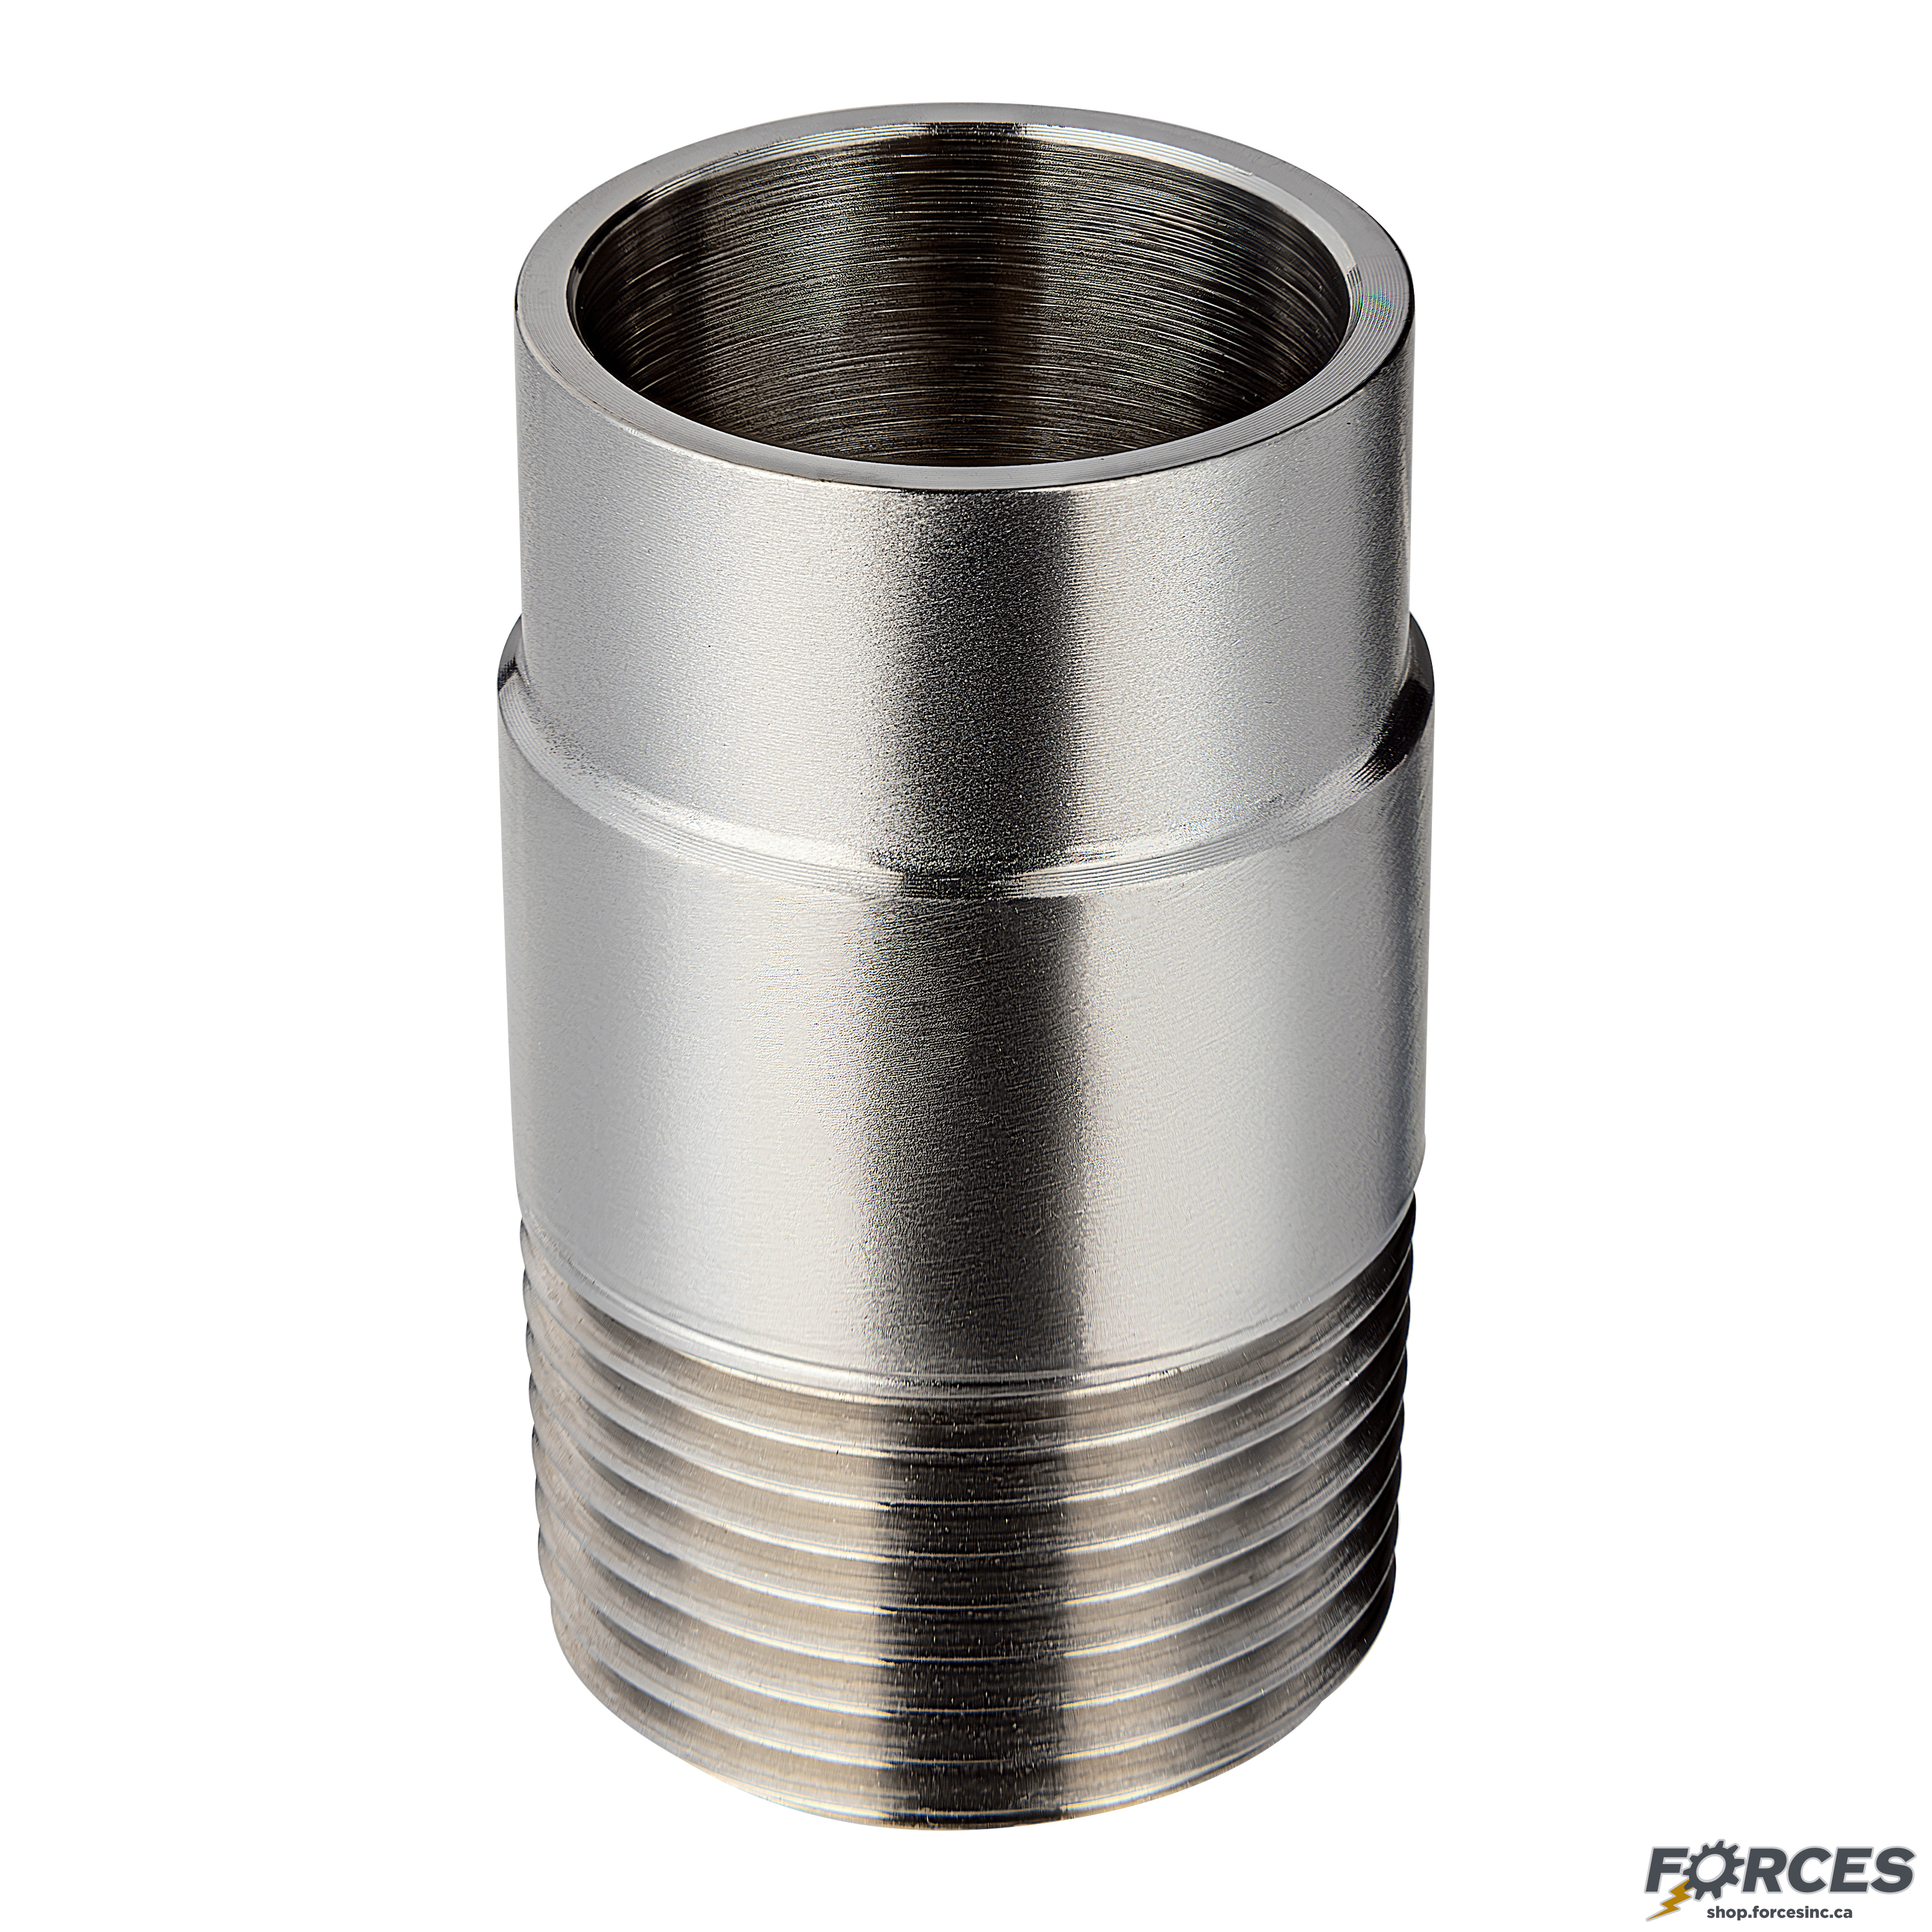 1-1/2" x 1-1/2" Butt Weld x Male NPT Adapter - Stainless Steel 316 - Forces Inc